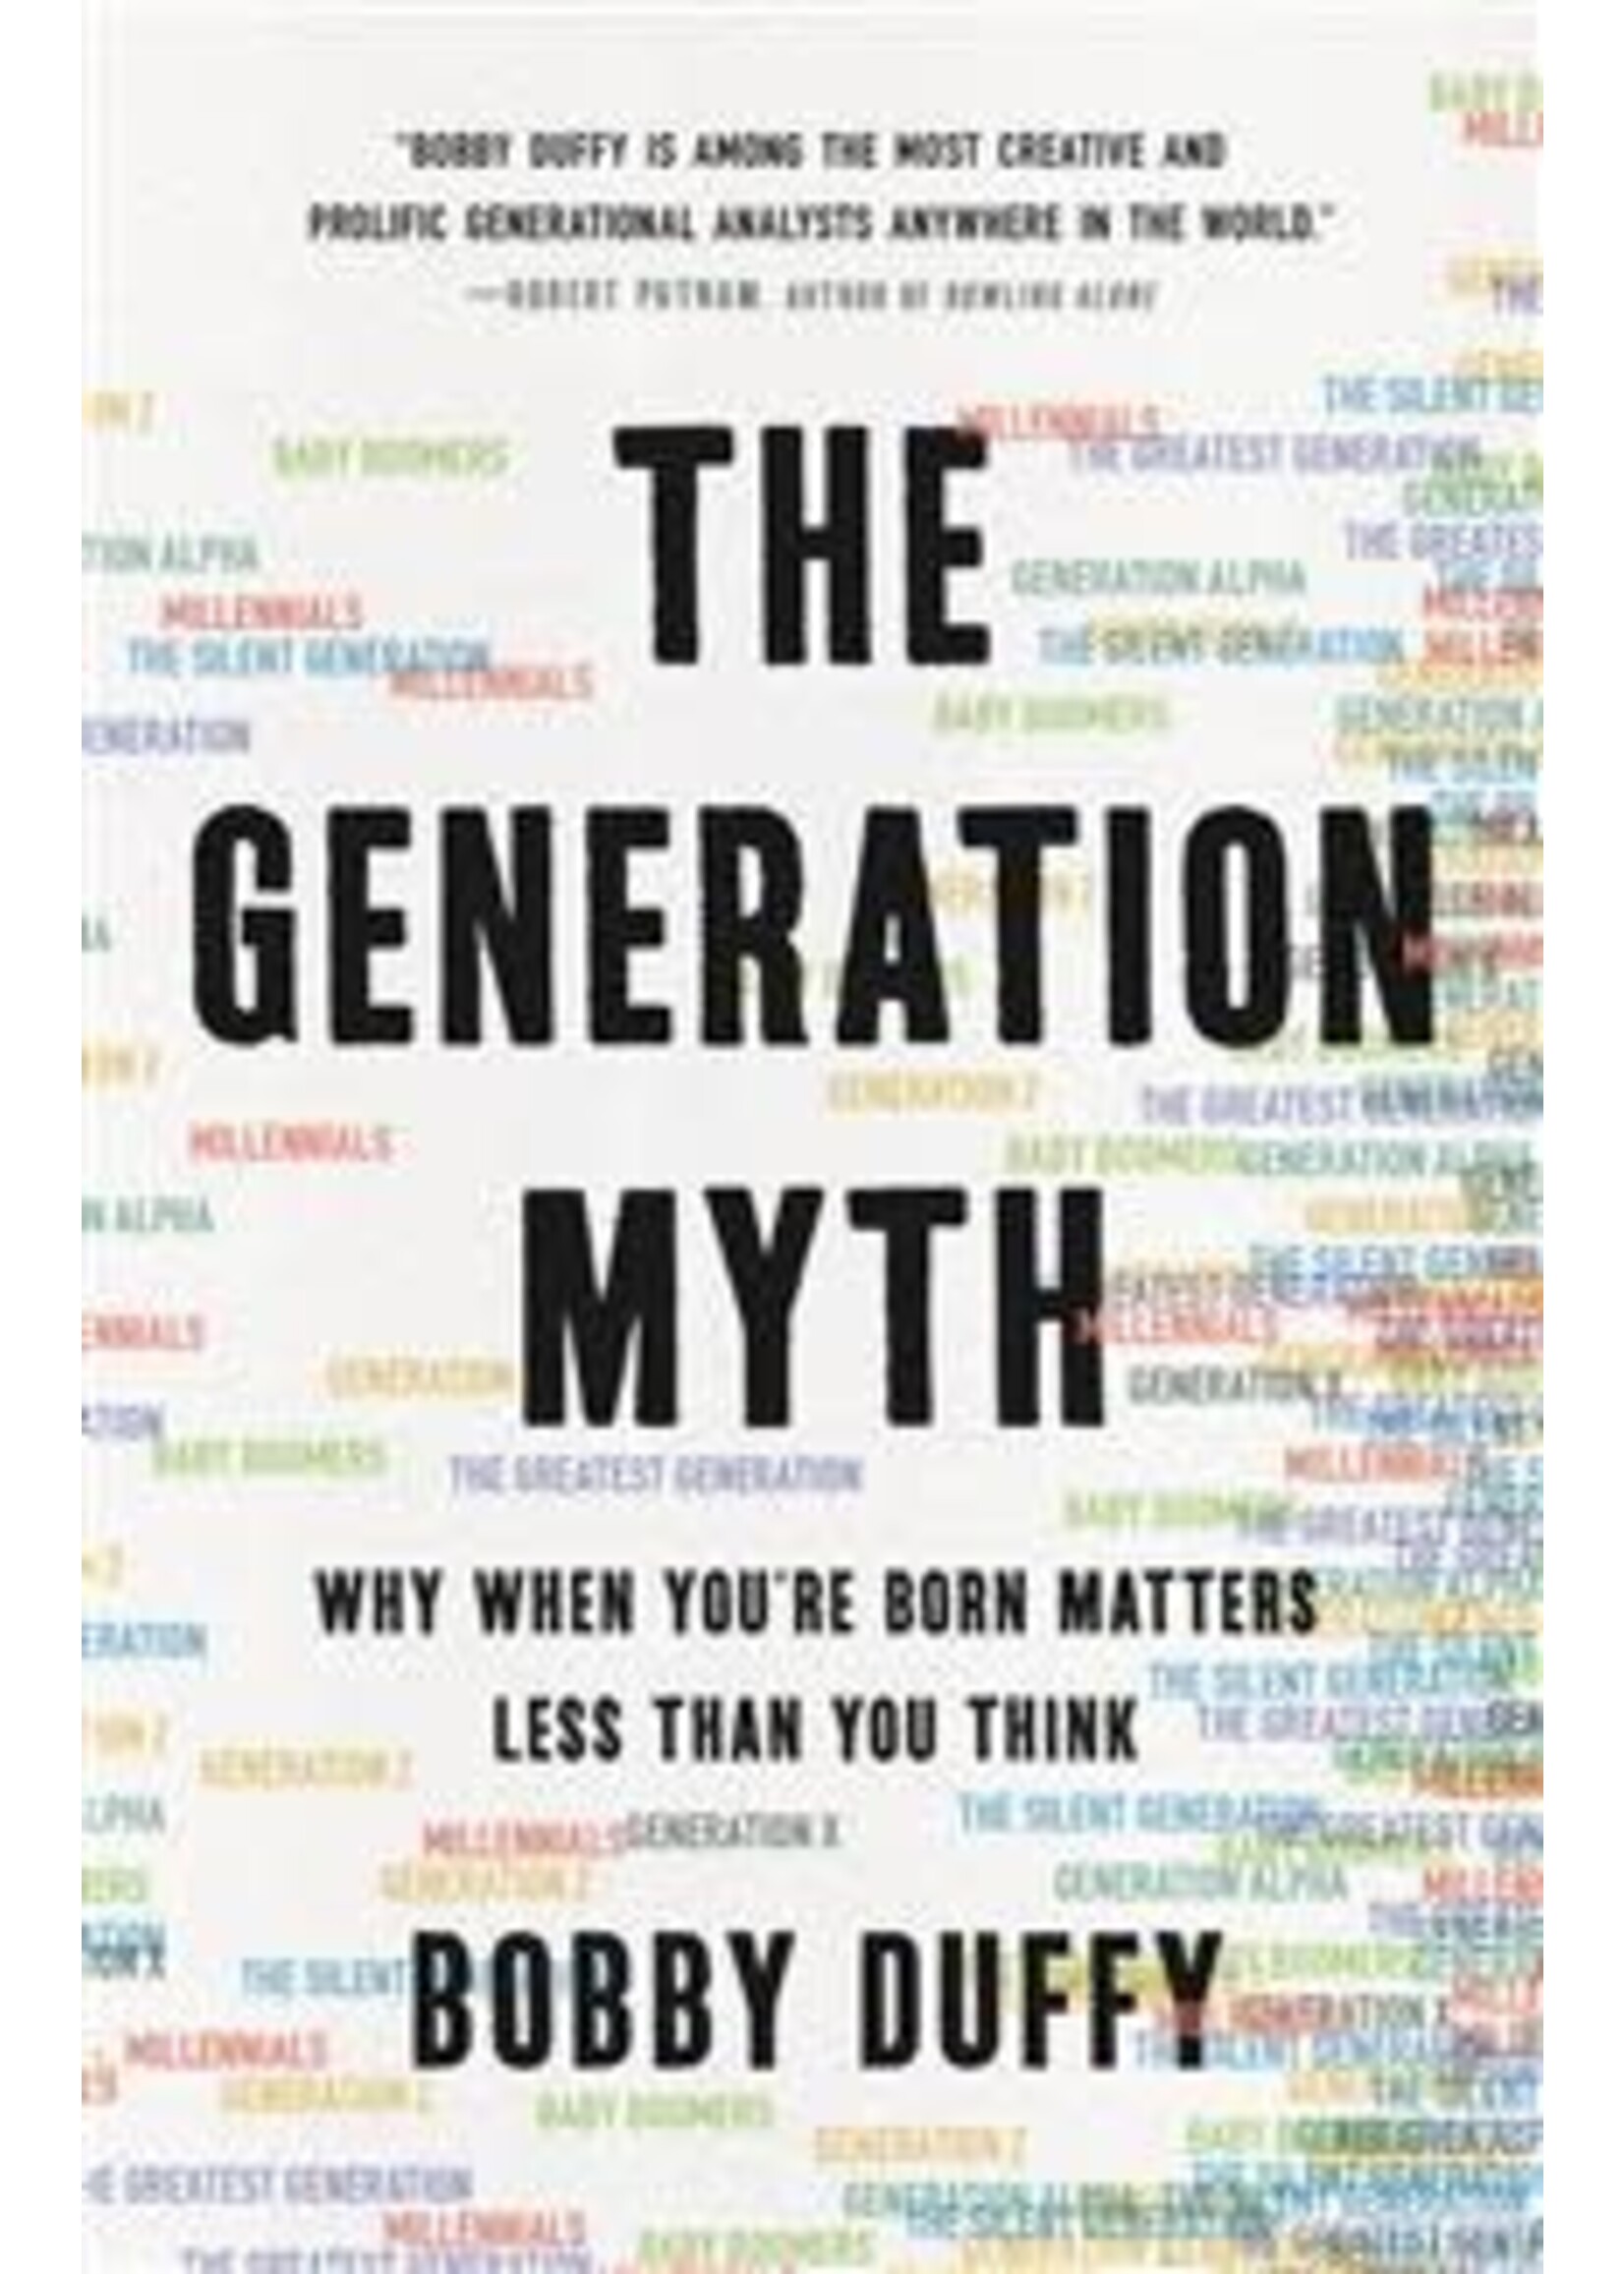 The Generation Myth: Why When You're Born Matters Less Than You Think by Bobby Duffy